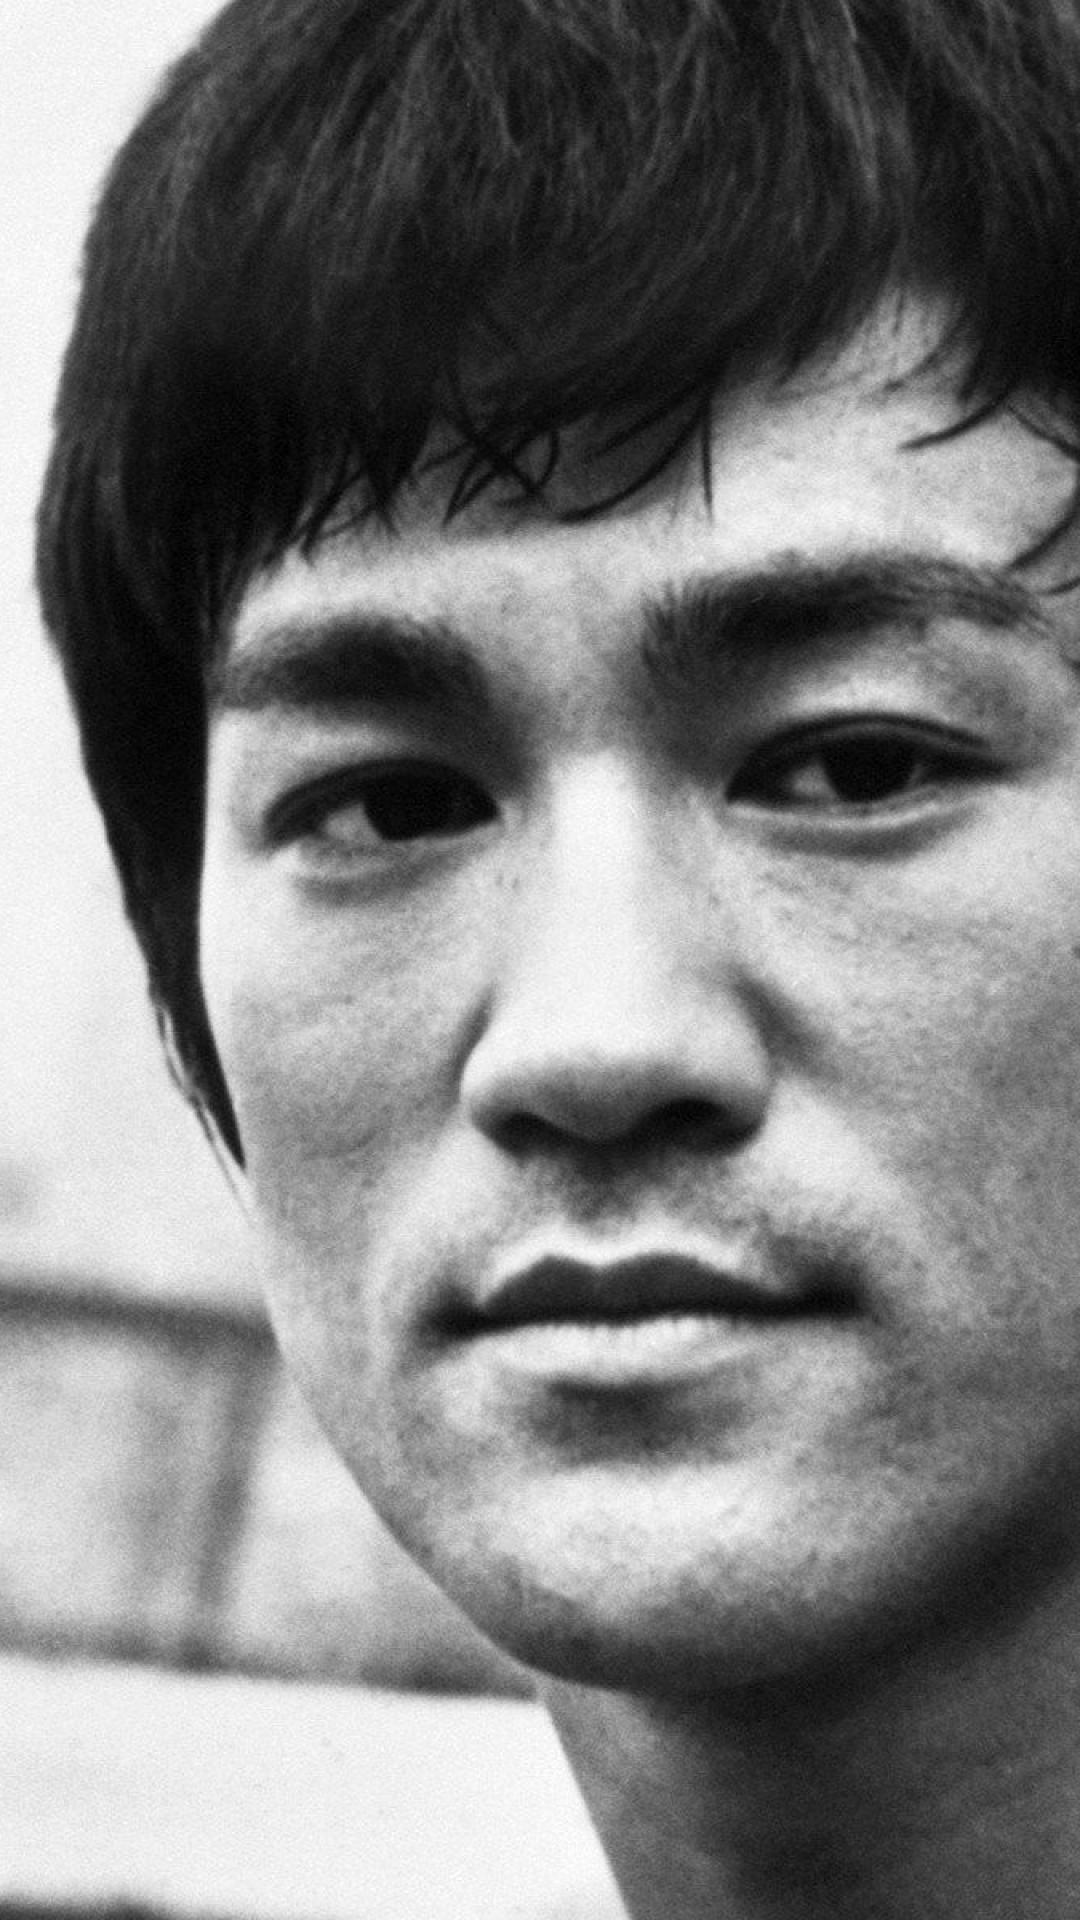 Pin by Naruaki Sasaki on ブルース・リー | Bruce lee, Bruce lee photos, Bruce lee  martial arts